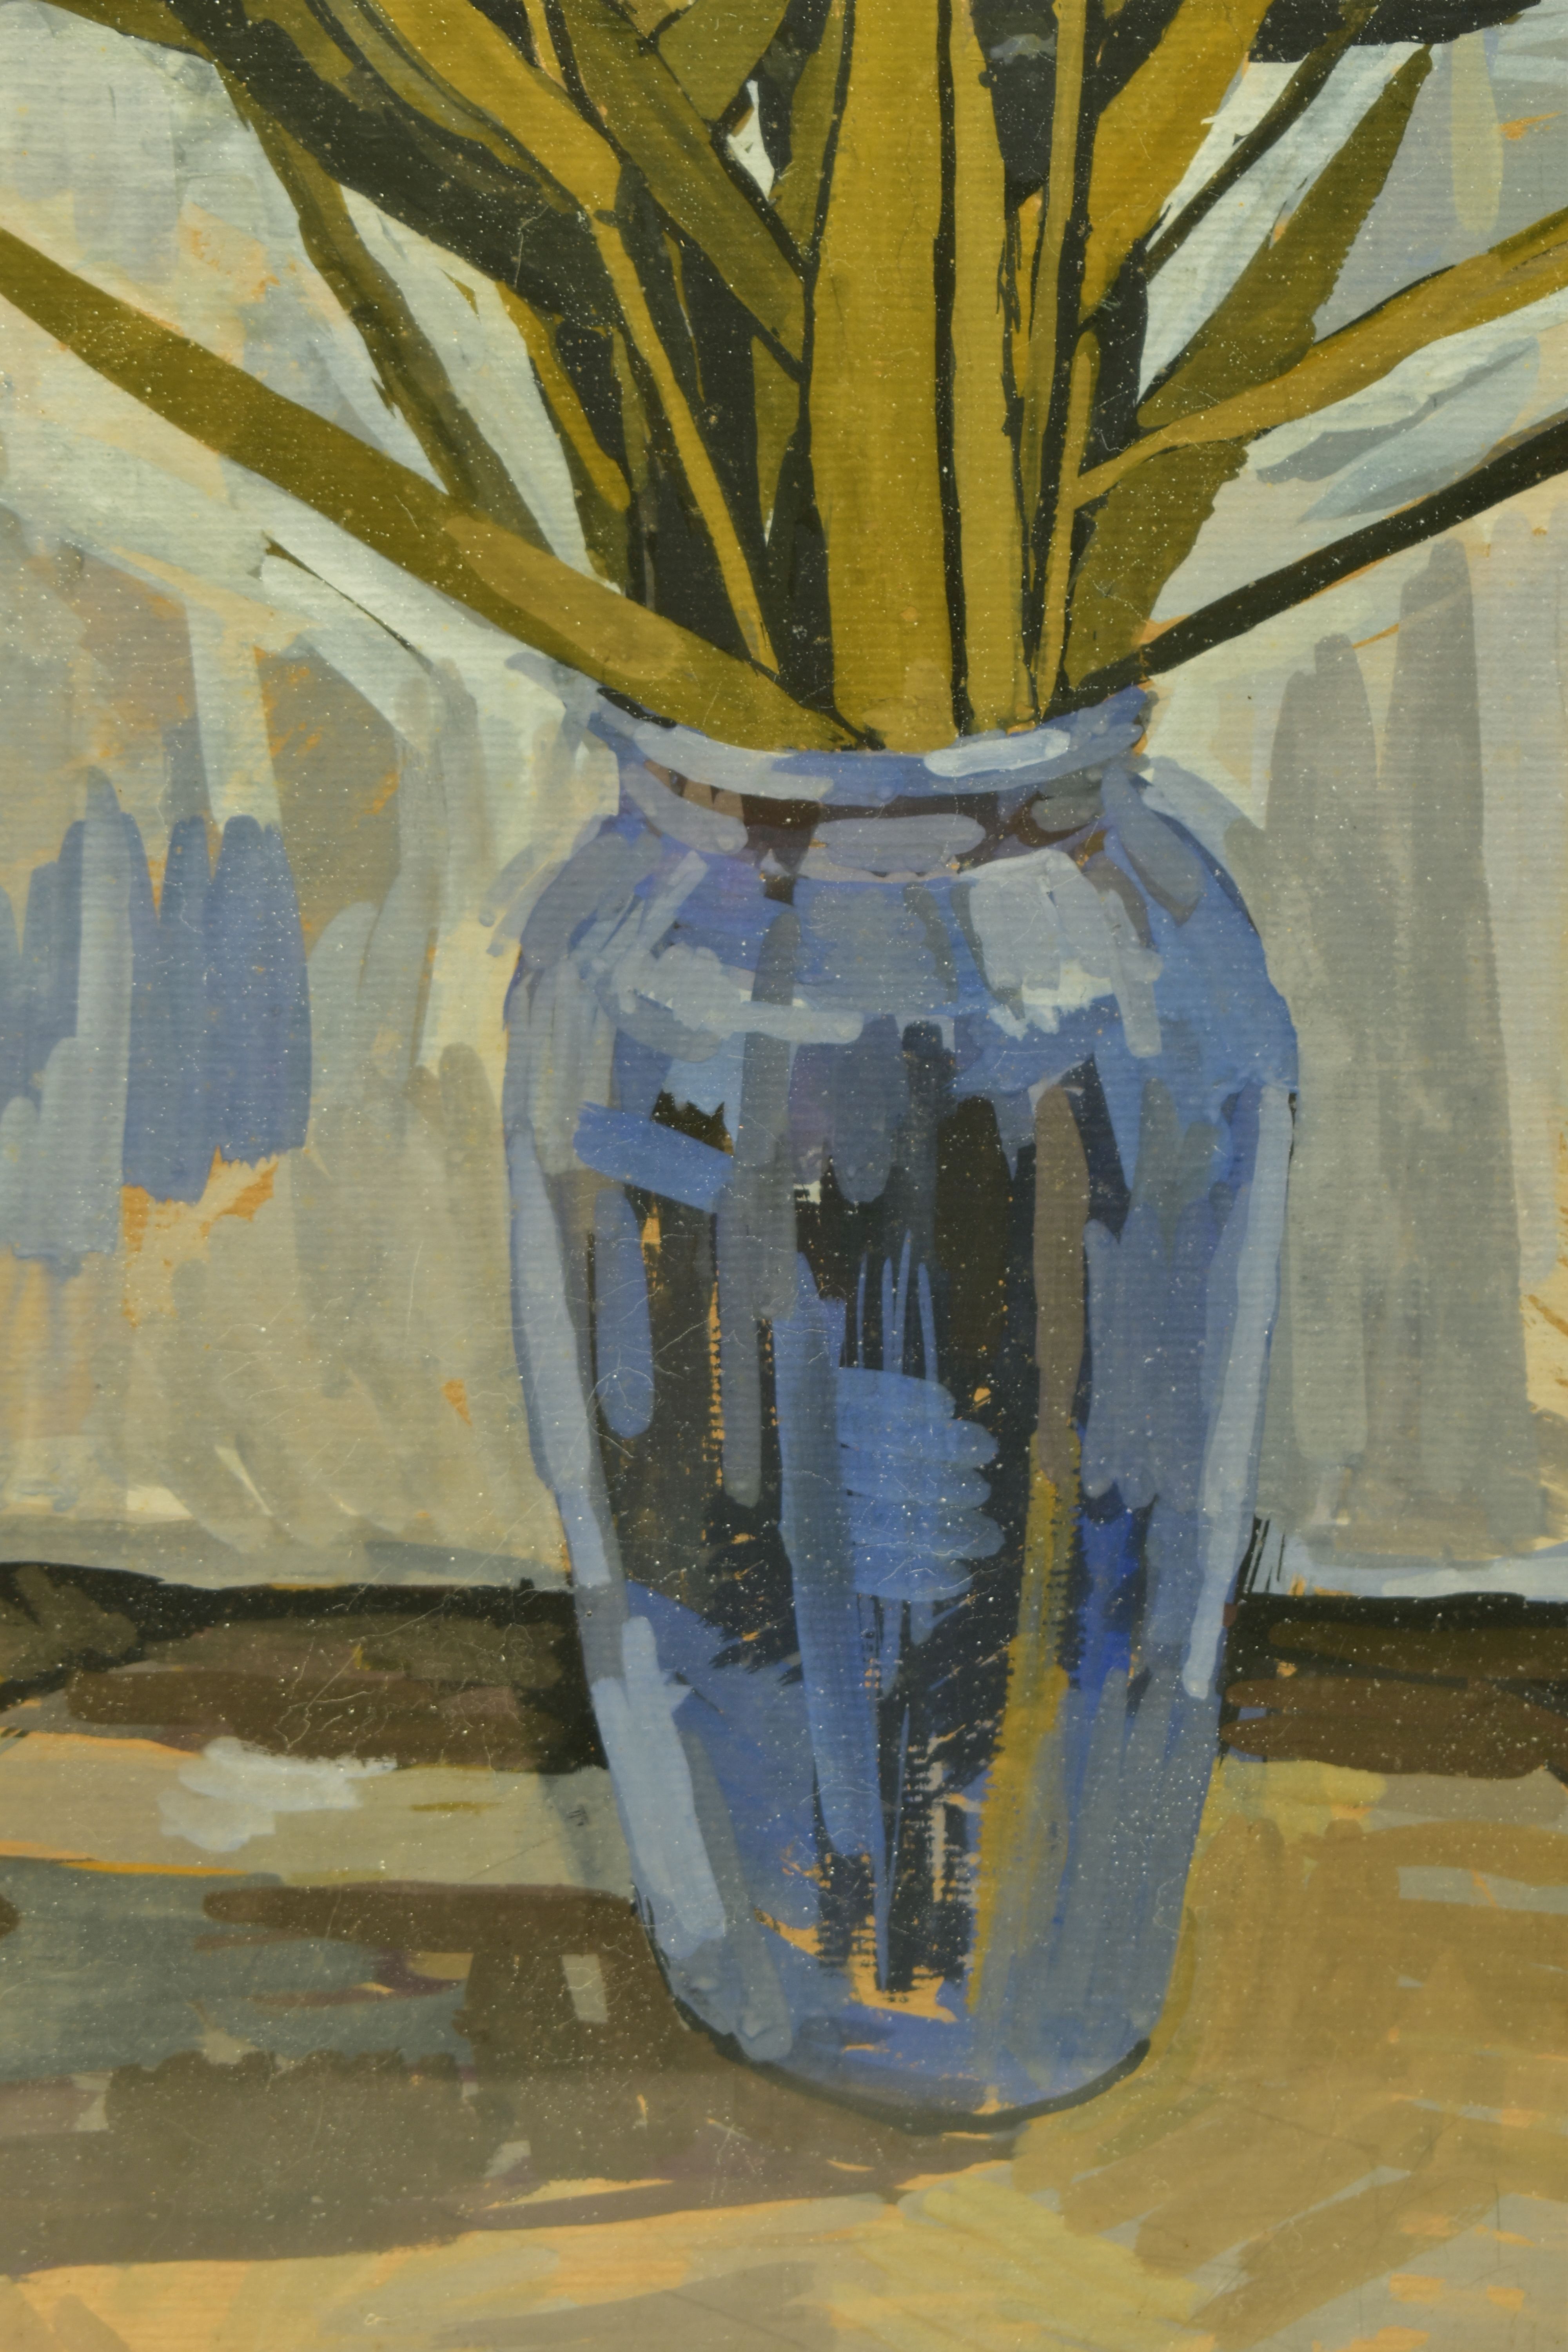 ATTRIBUTED TO FELICITY EVERSHED (20TH CENTURY) 'REEDS IN A VASE', a still life study of trees in a - Image 3 of 8